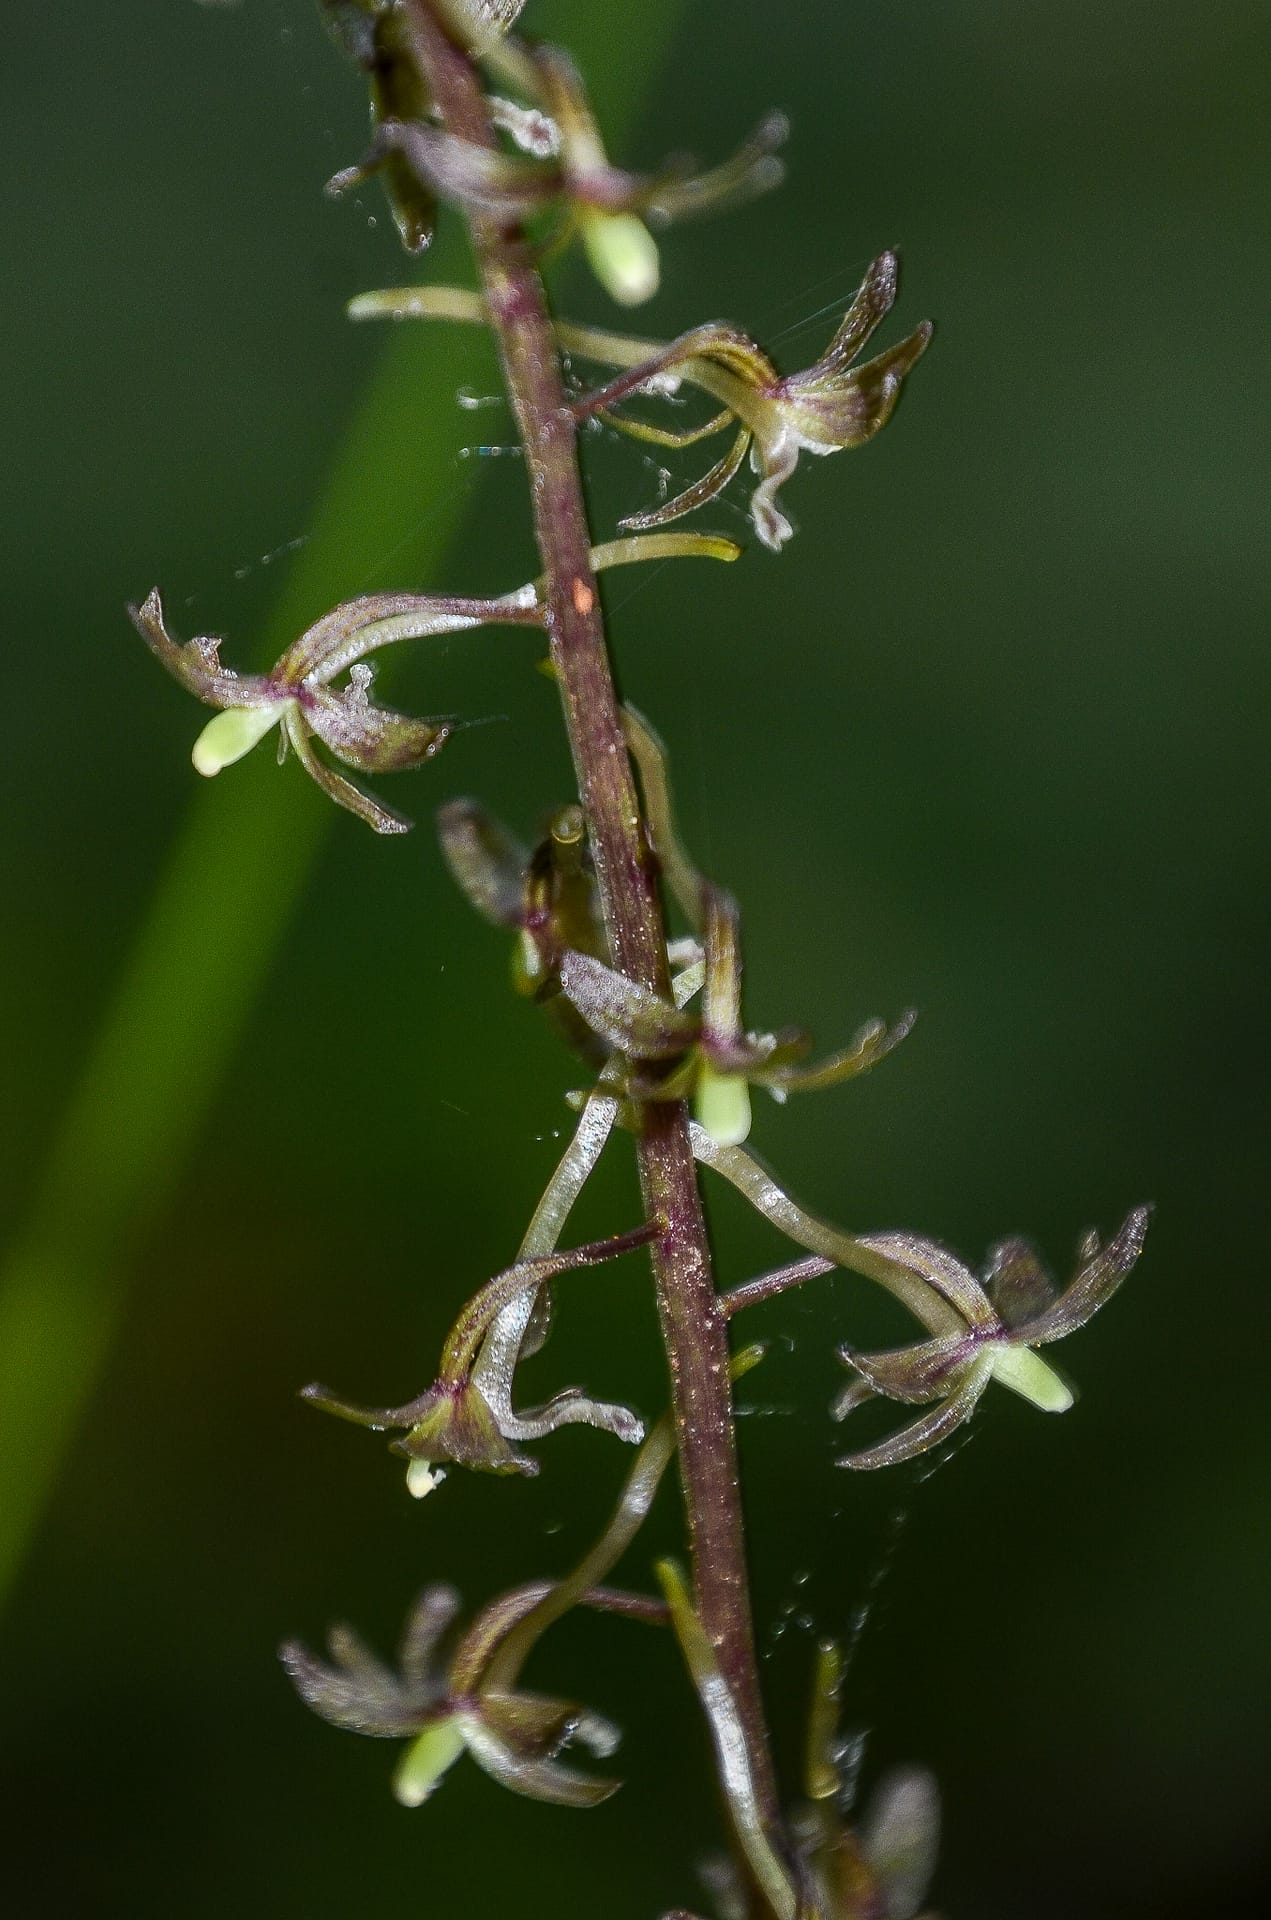 Cranefly orchid
